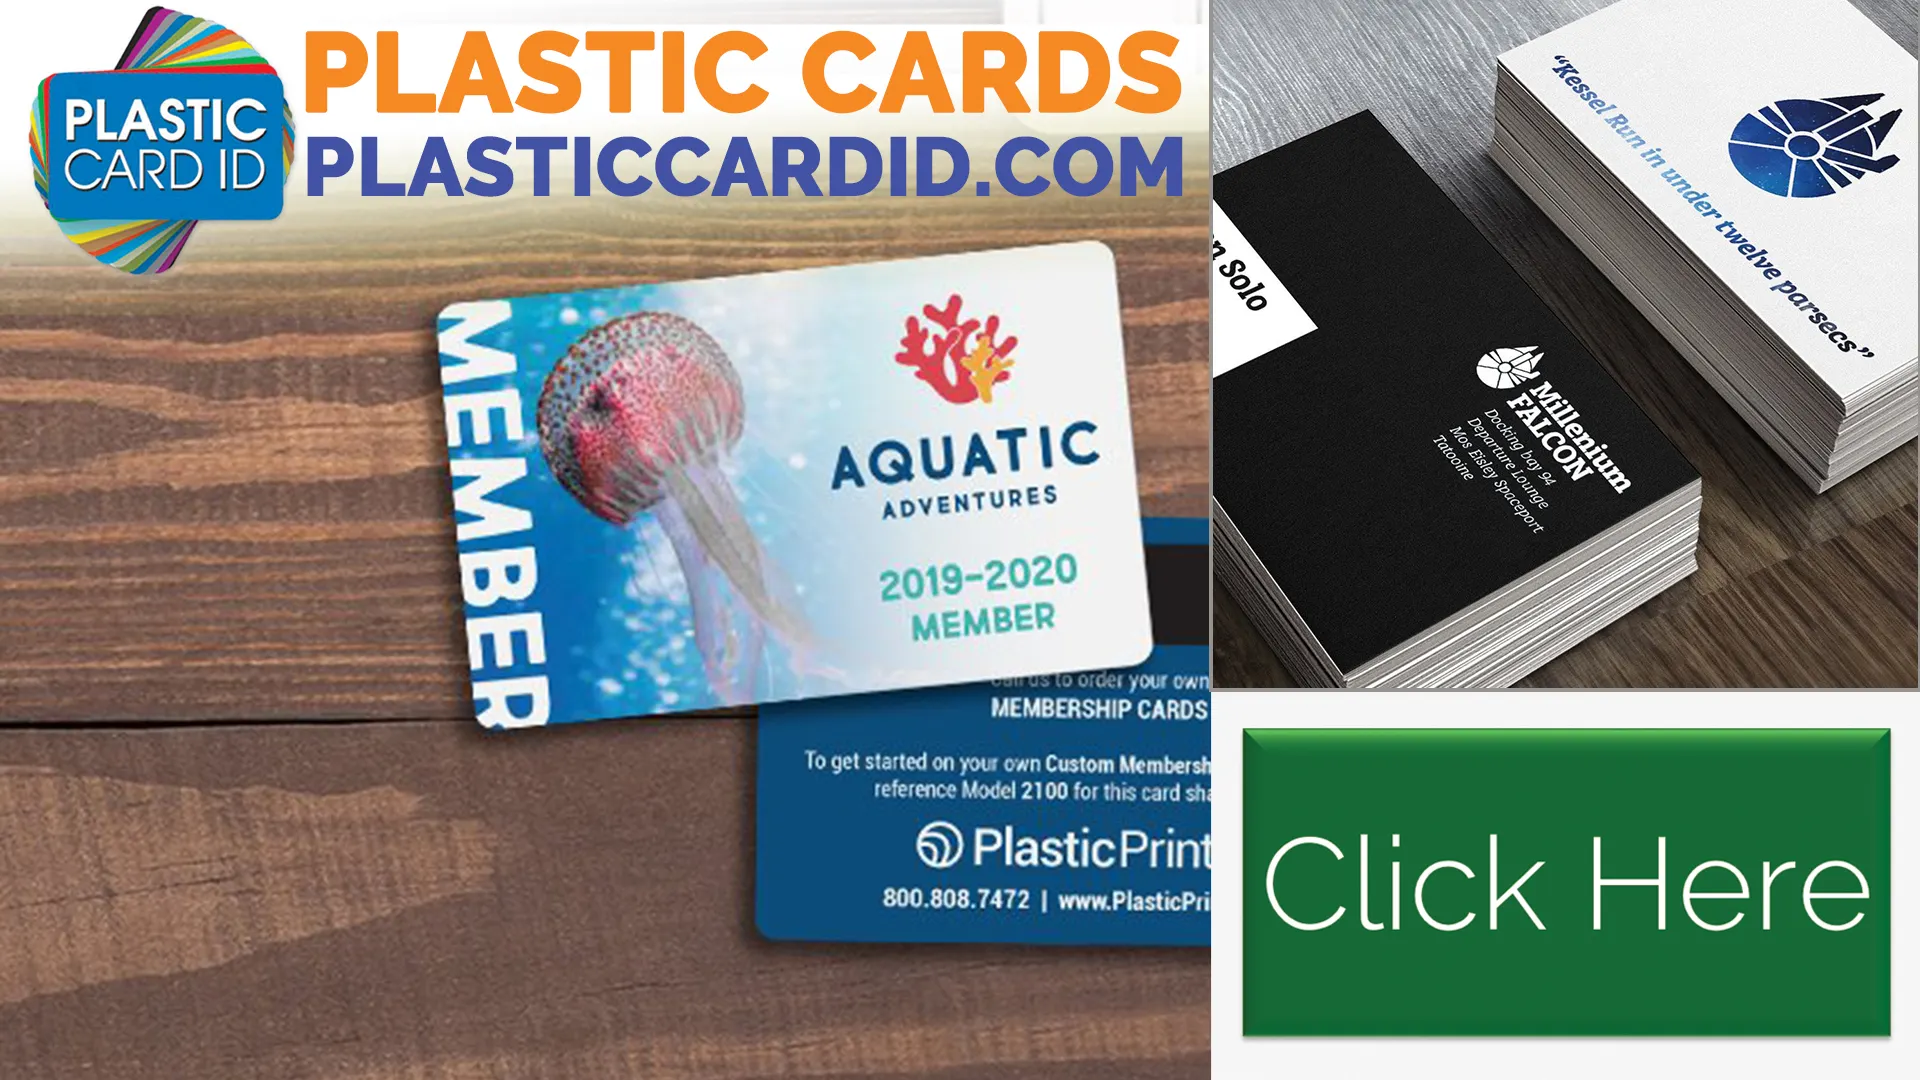 Why Choose Plastic Cards for Your Branding Needs?